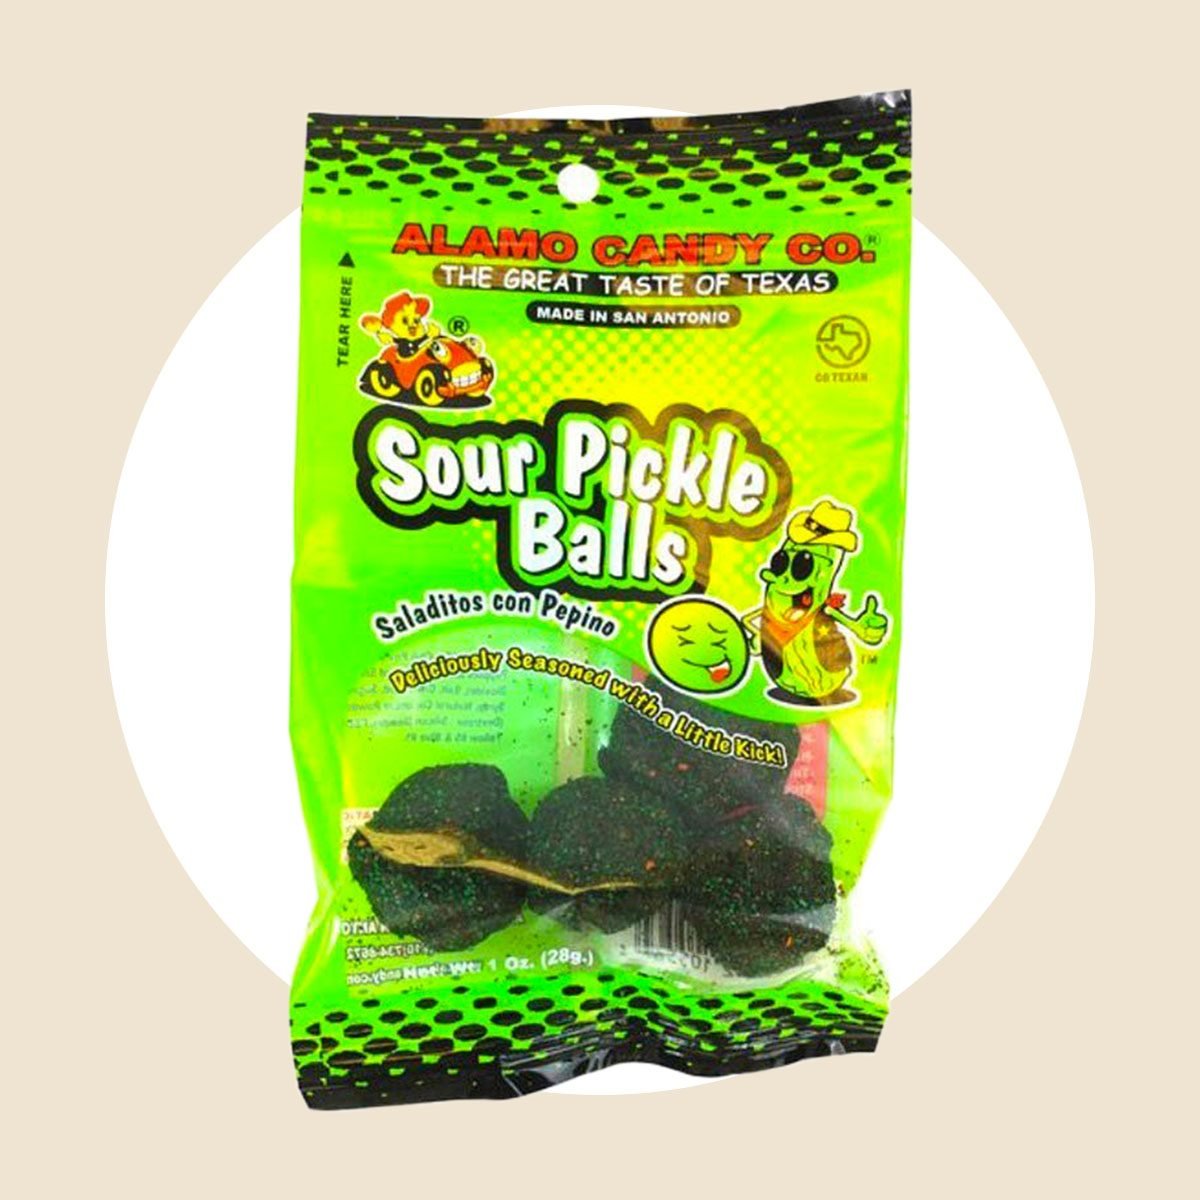 Sour Pickle Ball Candy Via Merchant 21 Pickled Flavored Foods